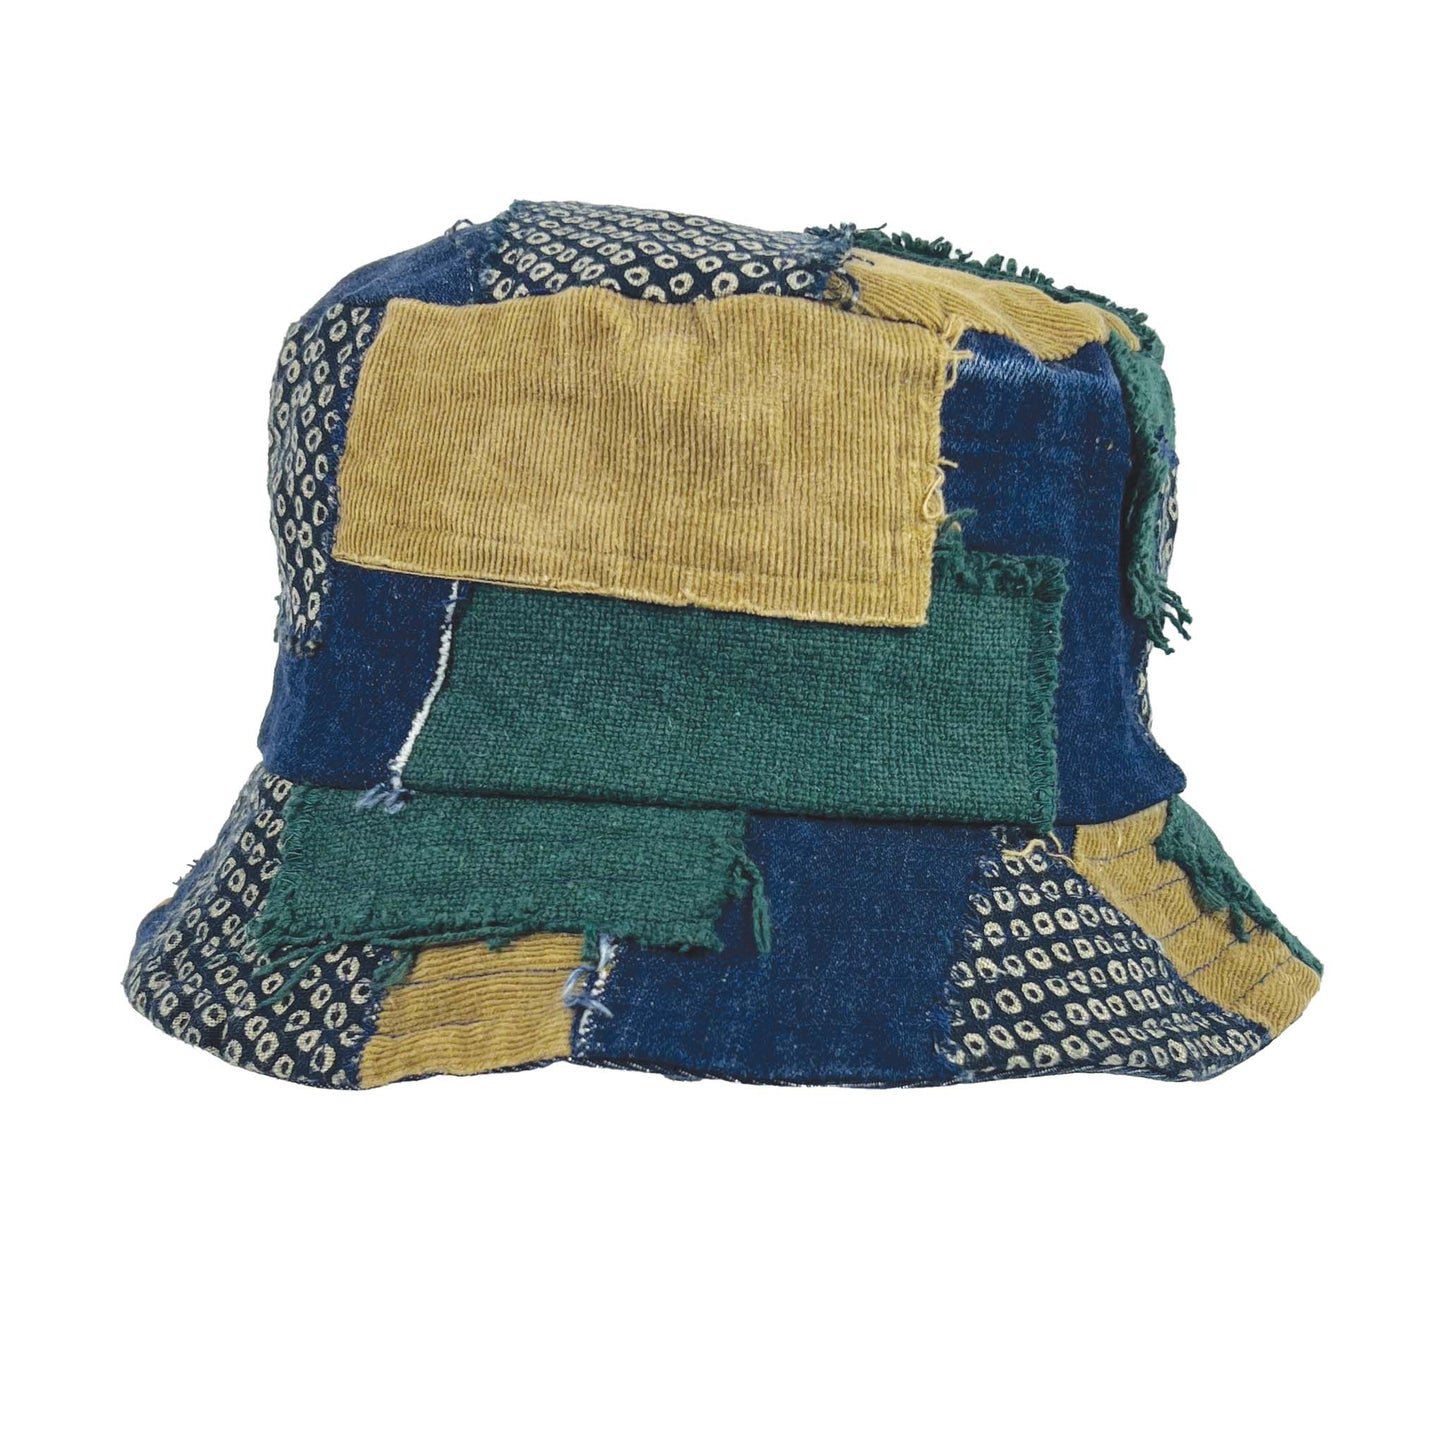 Patched Extra Big Bucket Hat Navy/Green/Tan/Japanese pattern